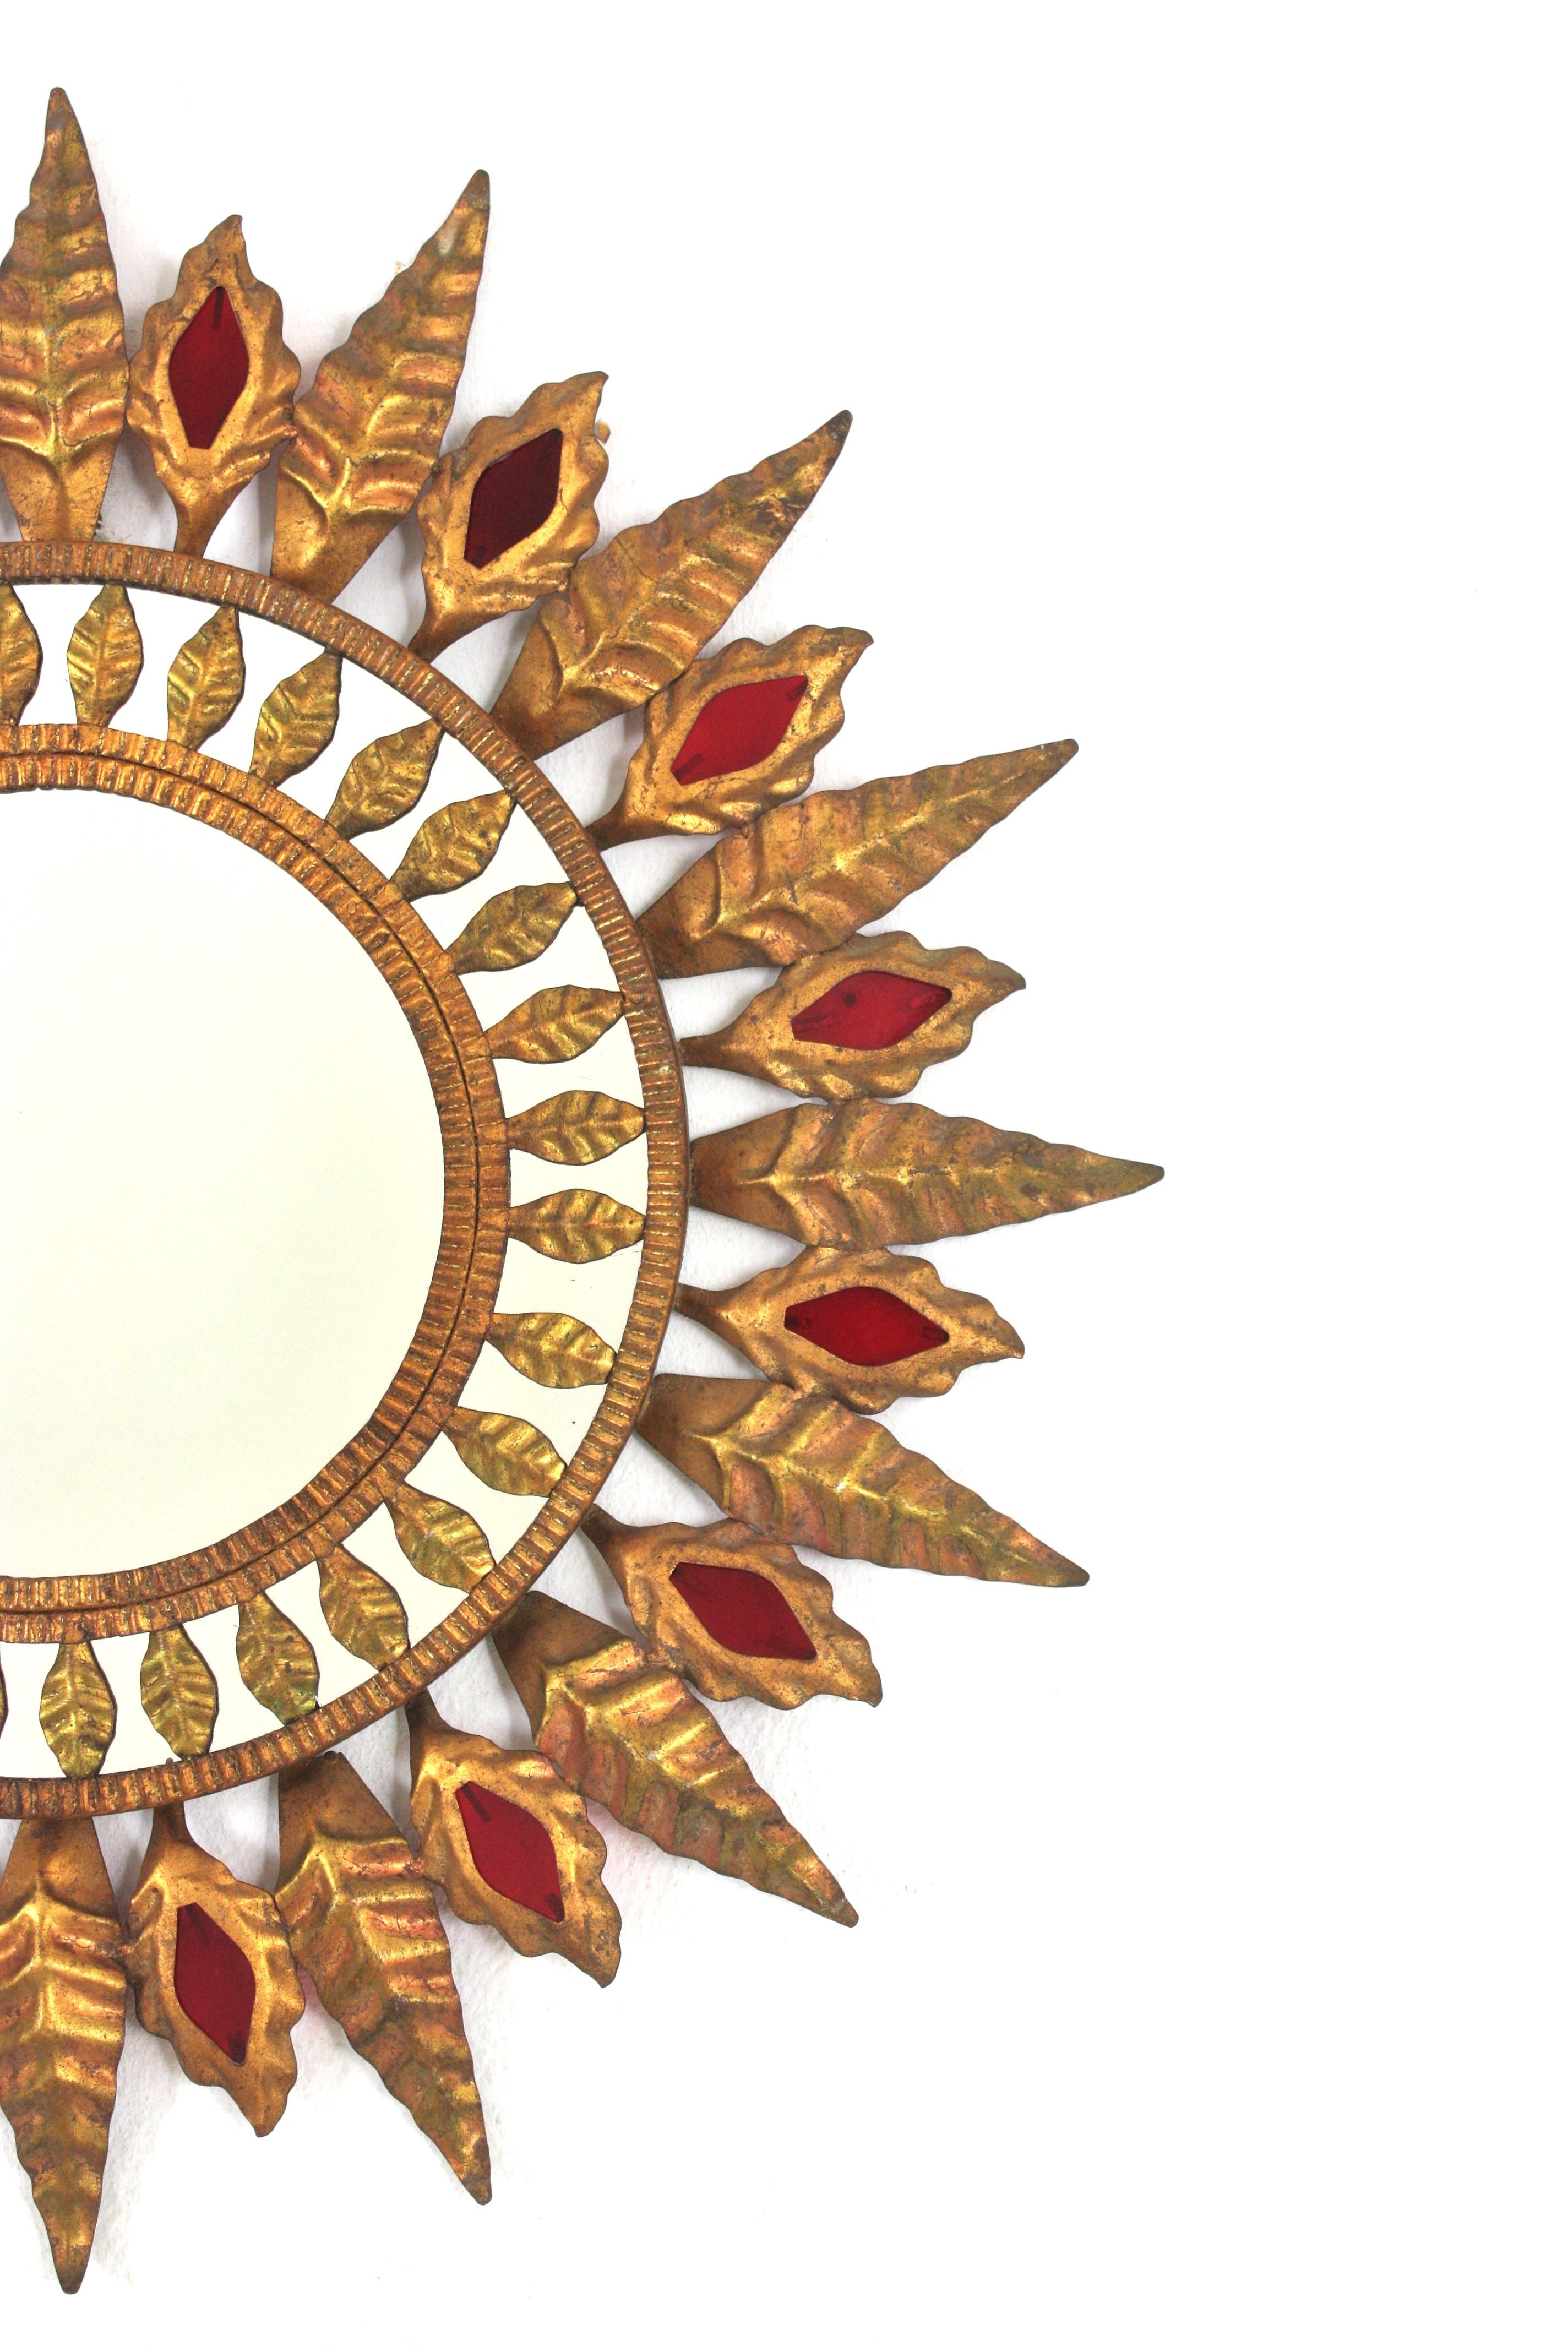 Hollywood Regency Sunburst Mirror in Gilt Metal and Red Glass Detail, 1950s For Sale 1